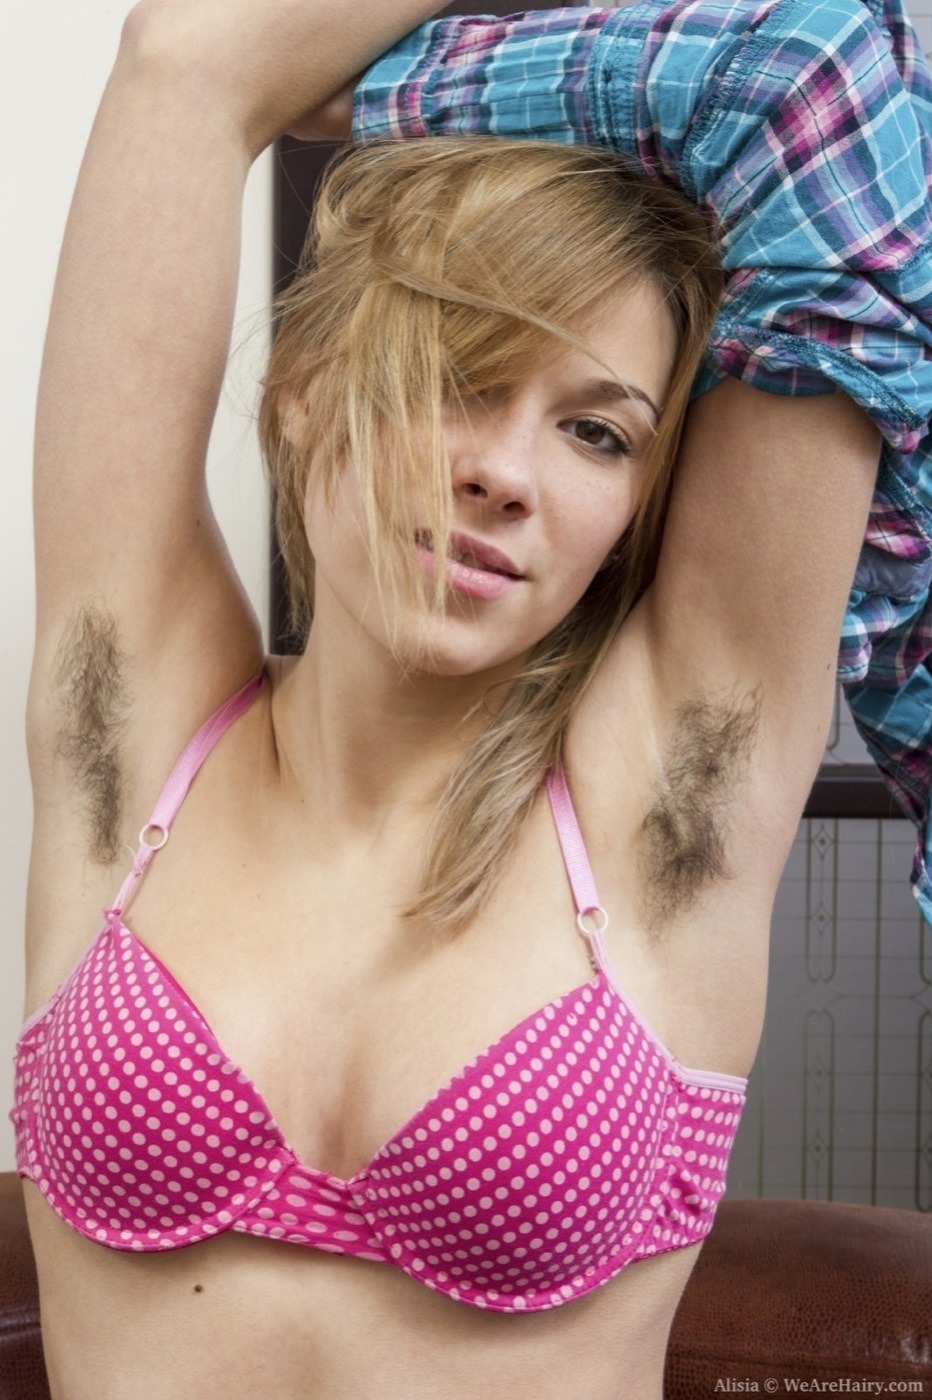 Girls showing off hairy snatch